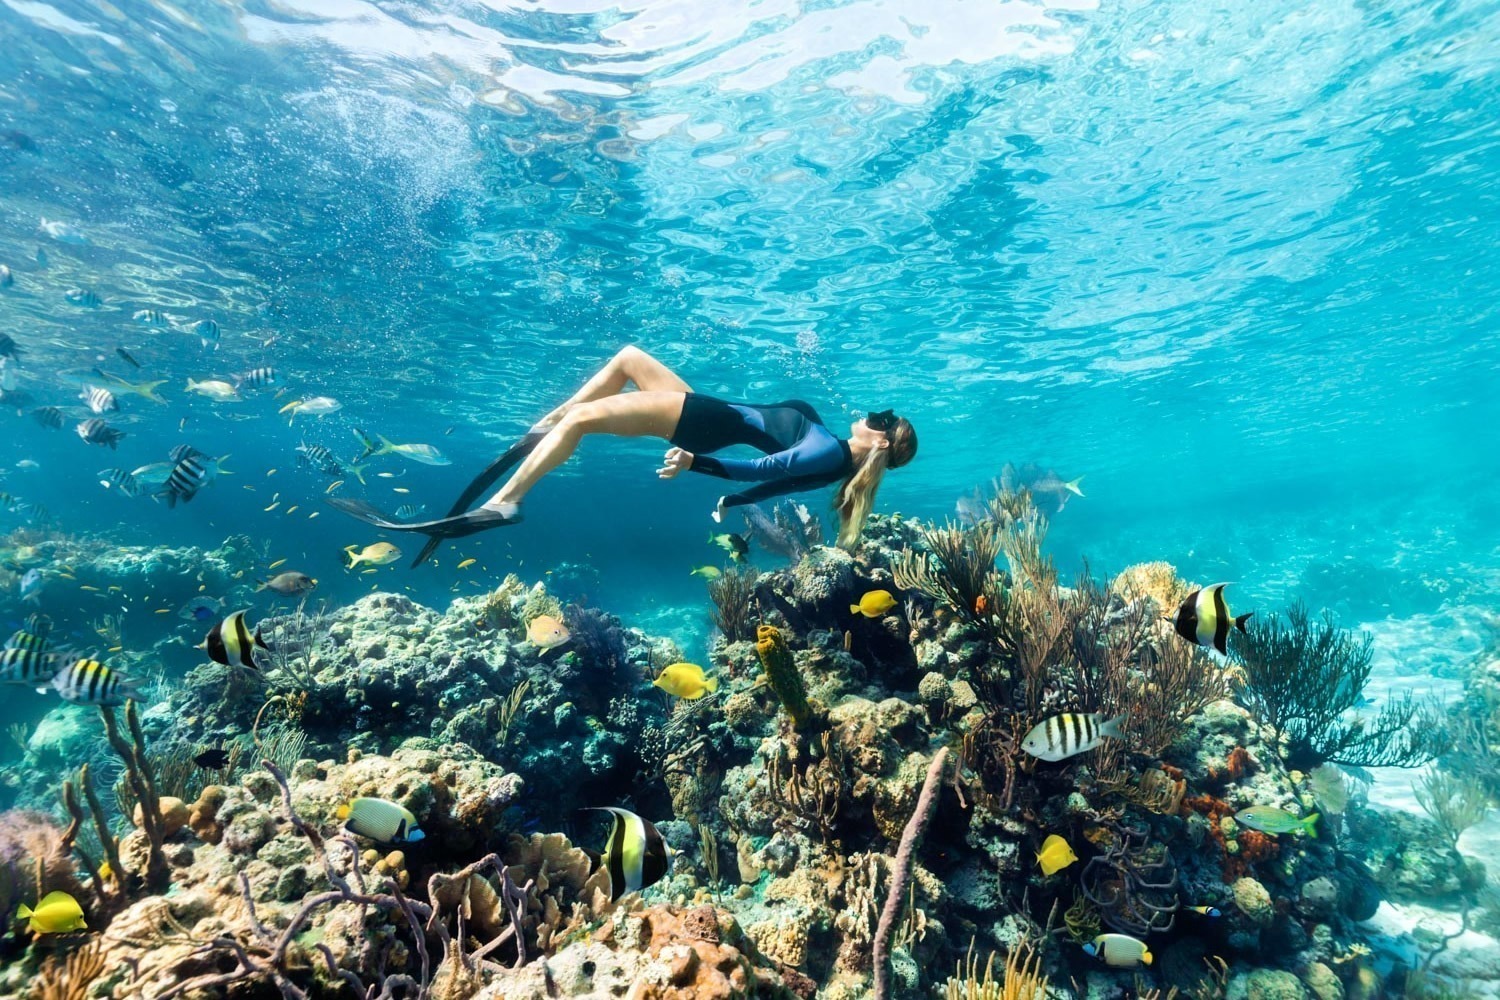  Snorkeling at Andros Barrier Reef: A Bahamas Day Trip